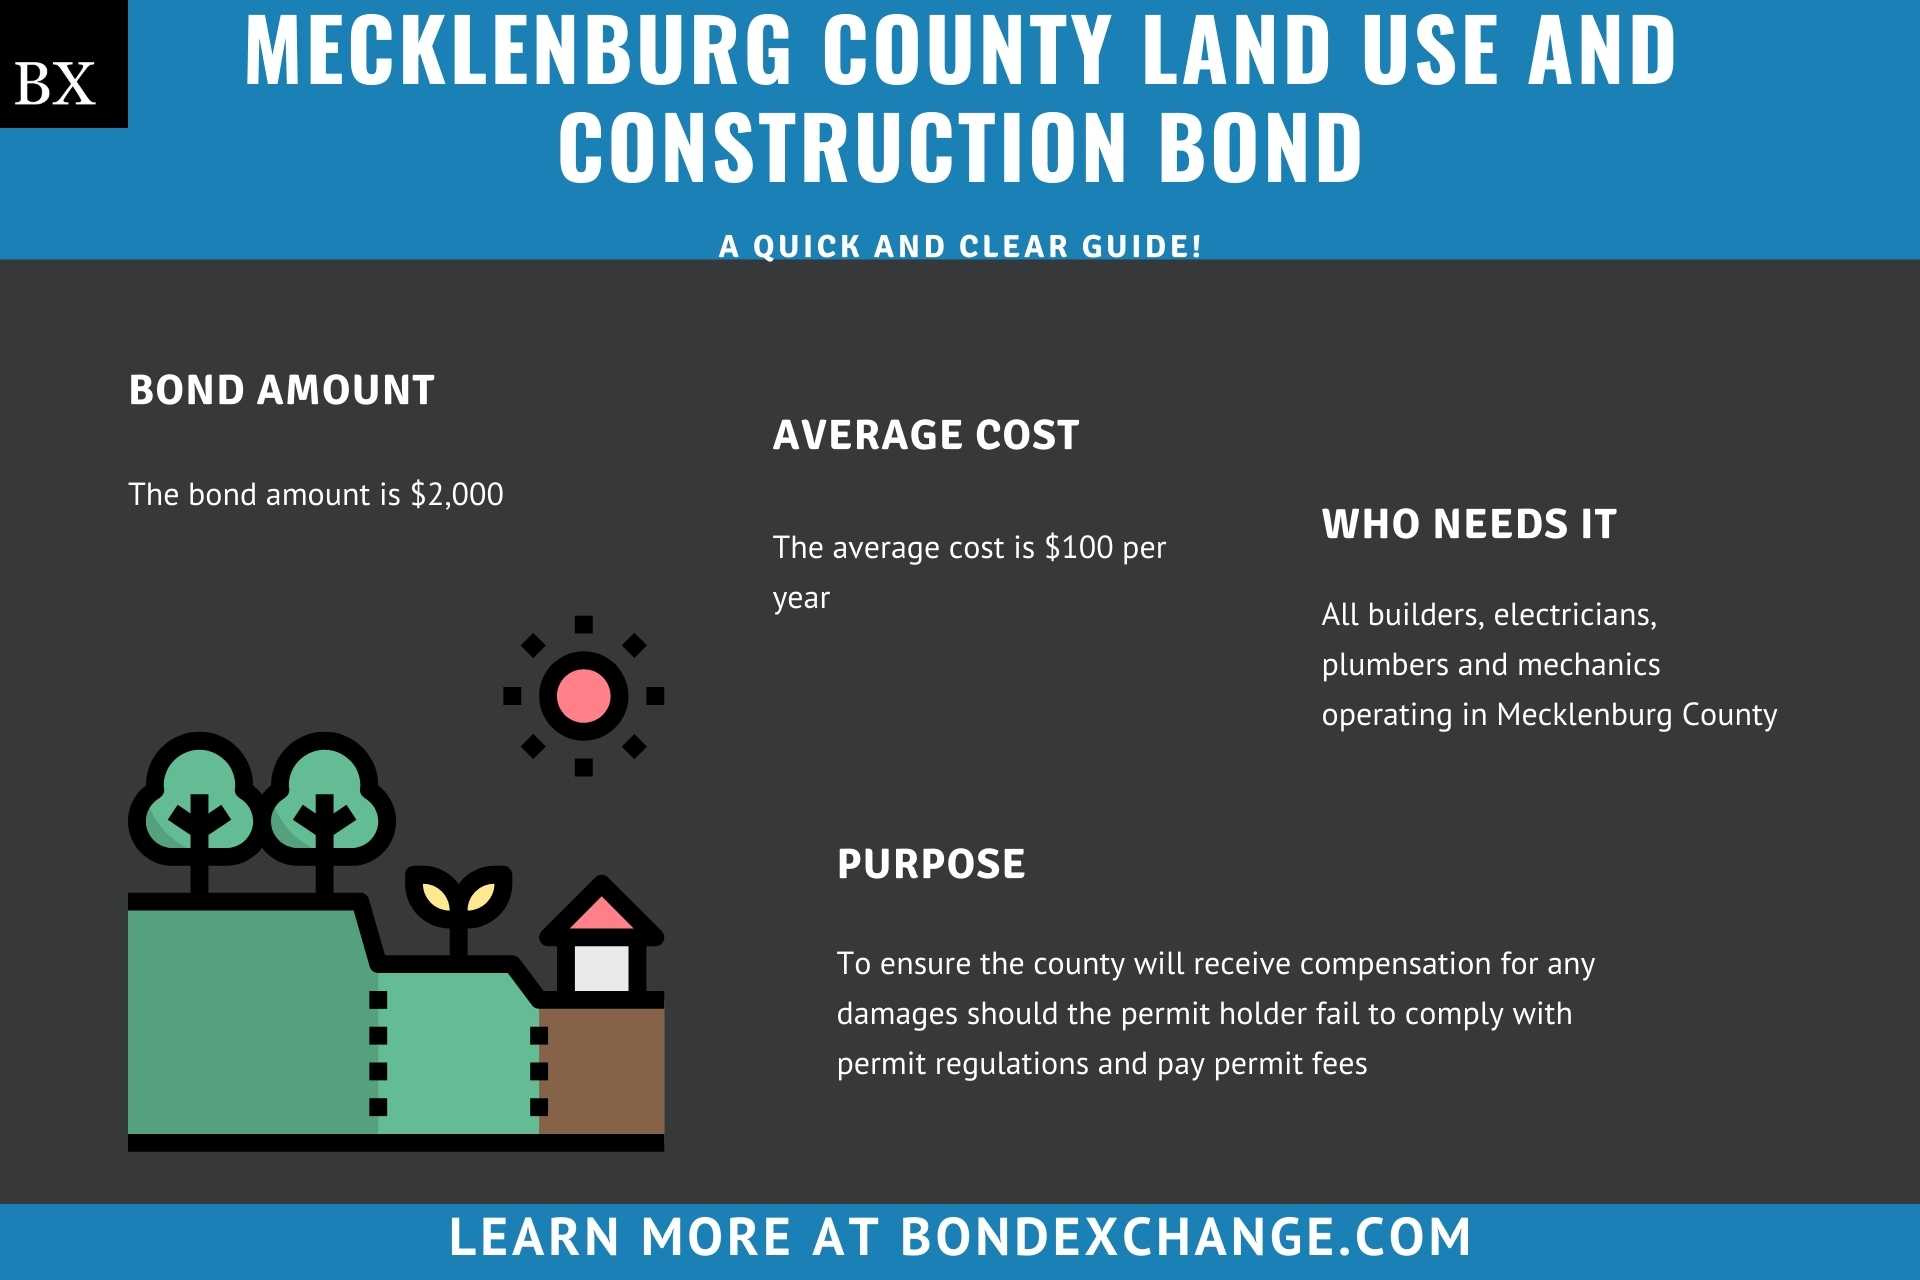 Mecklenburg County Land Use and Construction Bond